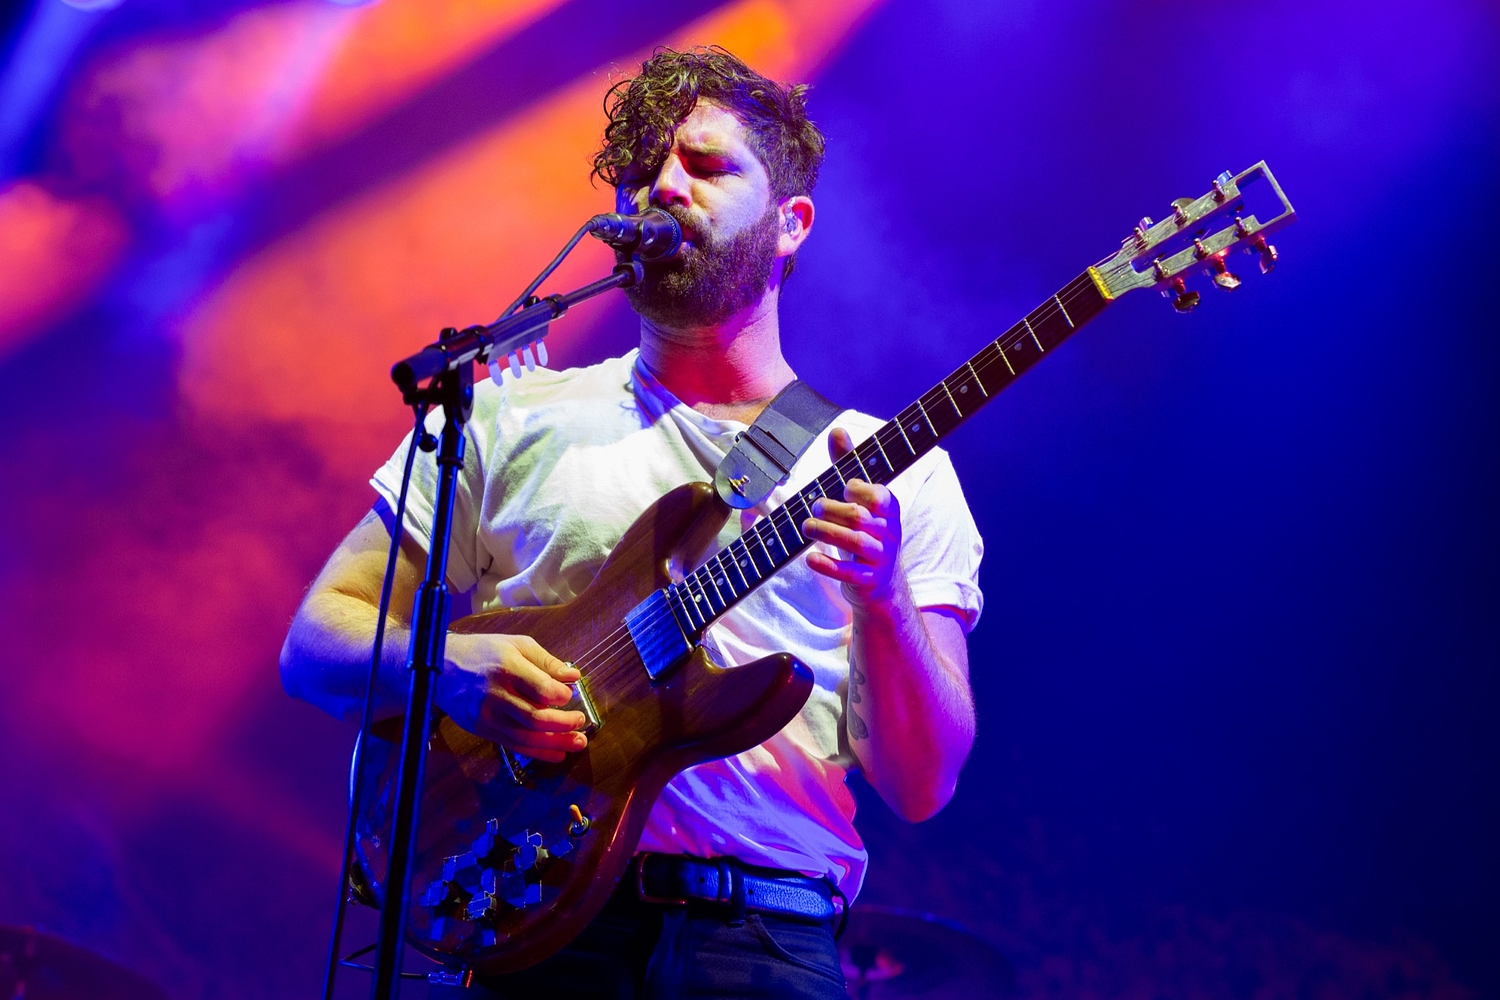 Foals have announced their first UK show of 2019